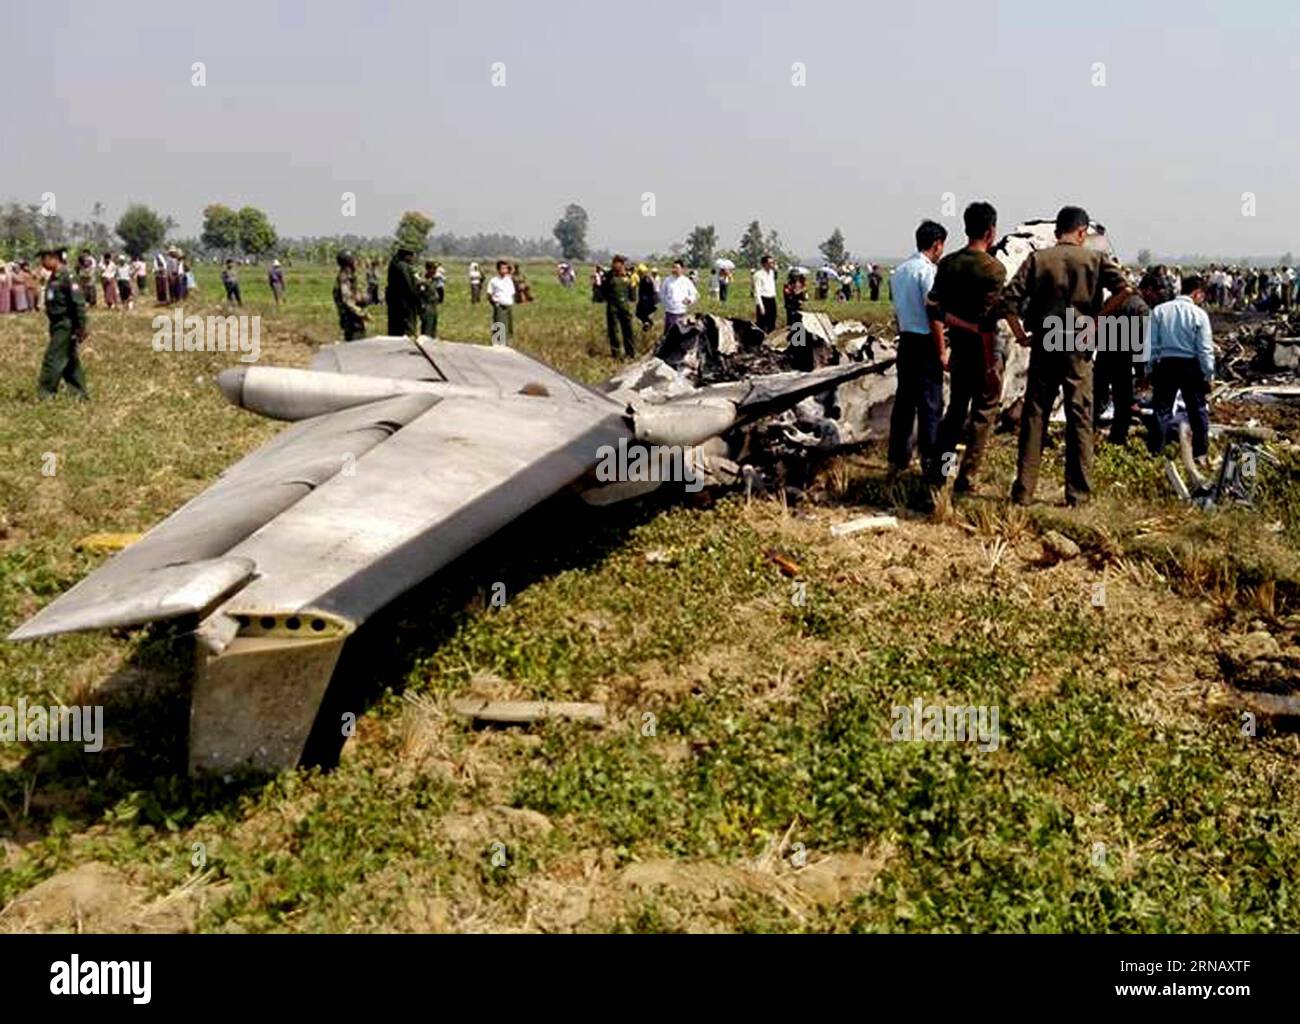 (160210) -- NAY PYI TAW, Feb. 10, 2016 -- Myanmar military personnel inspect the wreckage of a military aircraft which crashed near Shwepyitha village tract in Lewe township of Nay Pyi Taw, Myanmar, Feb. 10, 2016. Five military personnel were killed after a military-owned plane crashed in Myanmar s new capital of Nay Pyi Taw on Wednesday morning, Defence Services Commander-in-Chief office confirmed. The BEECH-1900D aircraft carrying five military officers who were flying during flight routine check crashed and burnt up near Shwepyitha village tract in Lewe township of Nay Pyi Taw shortly after Stock Photo